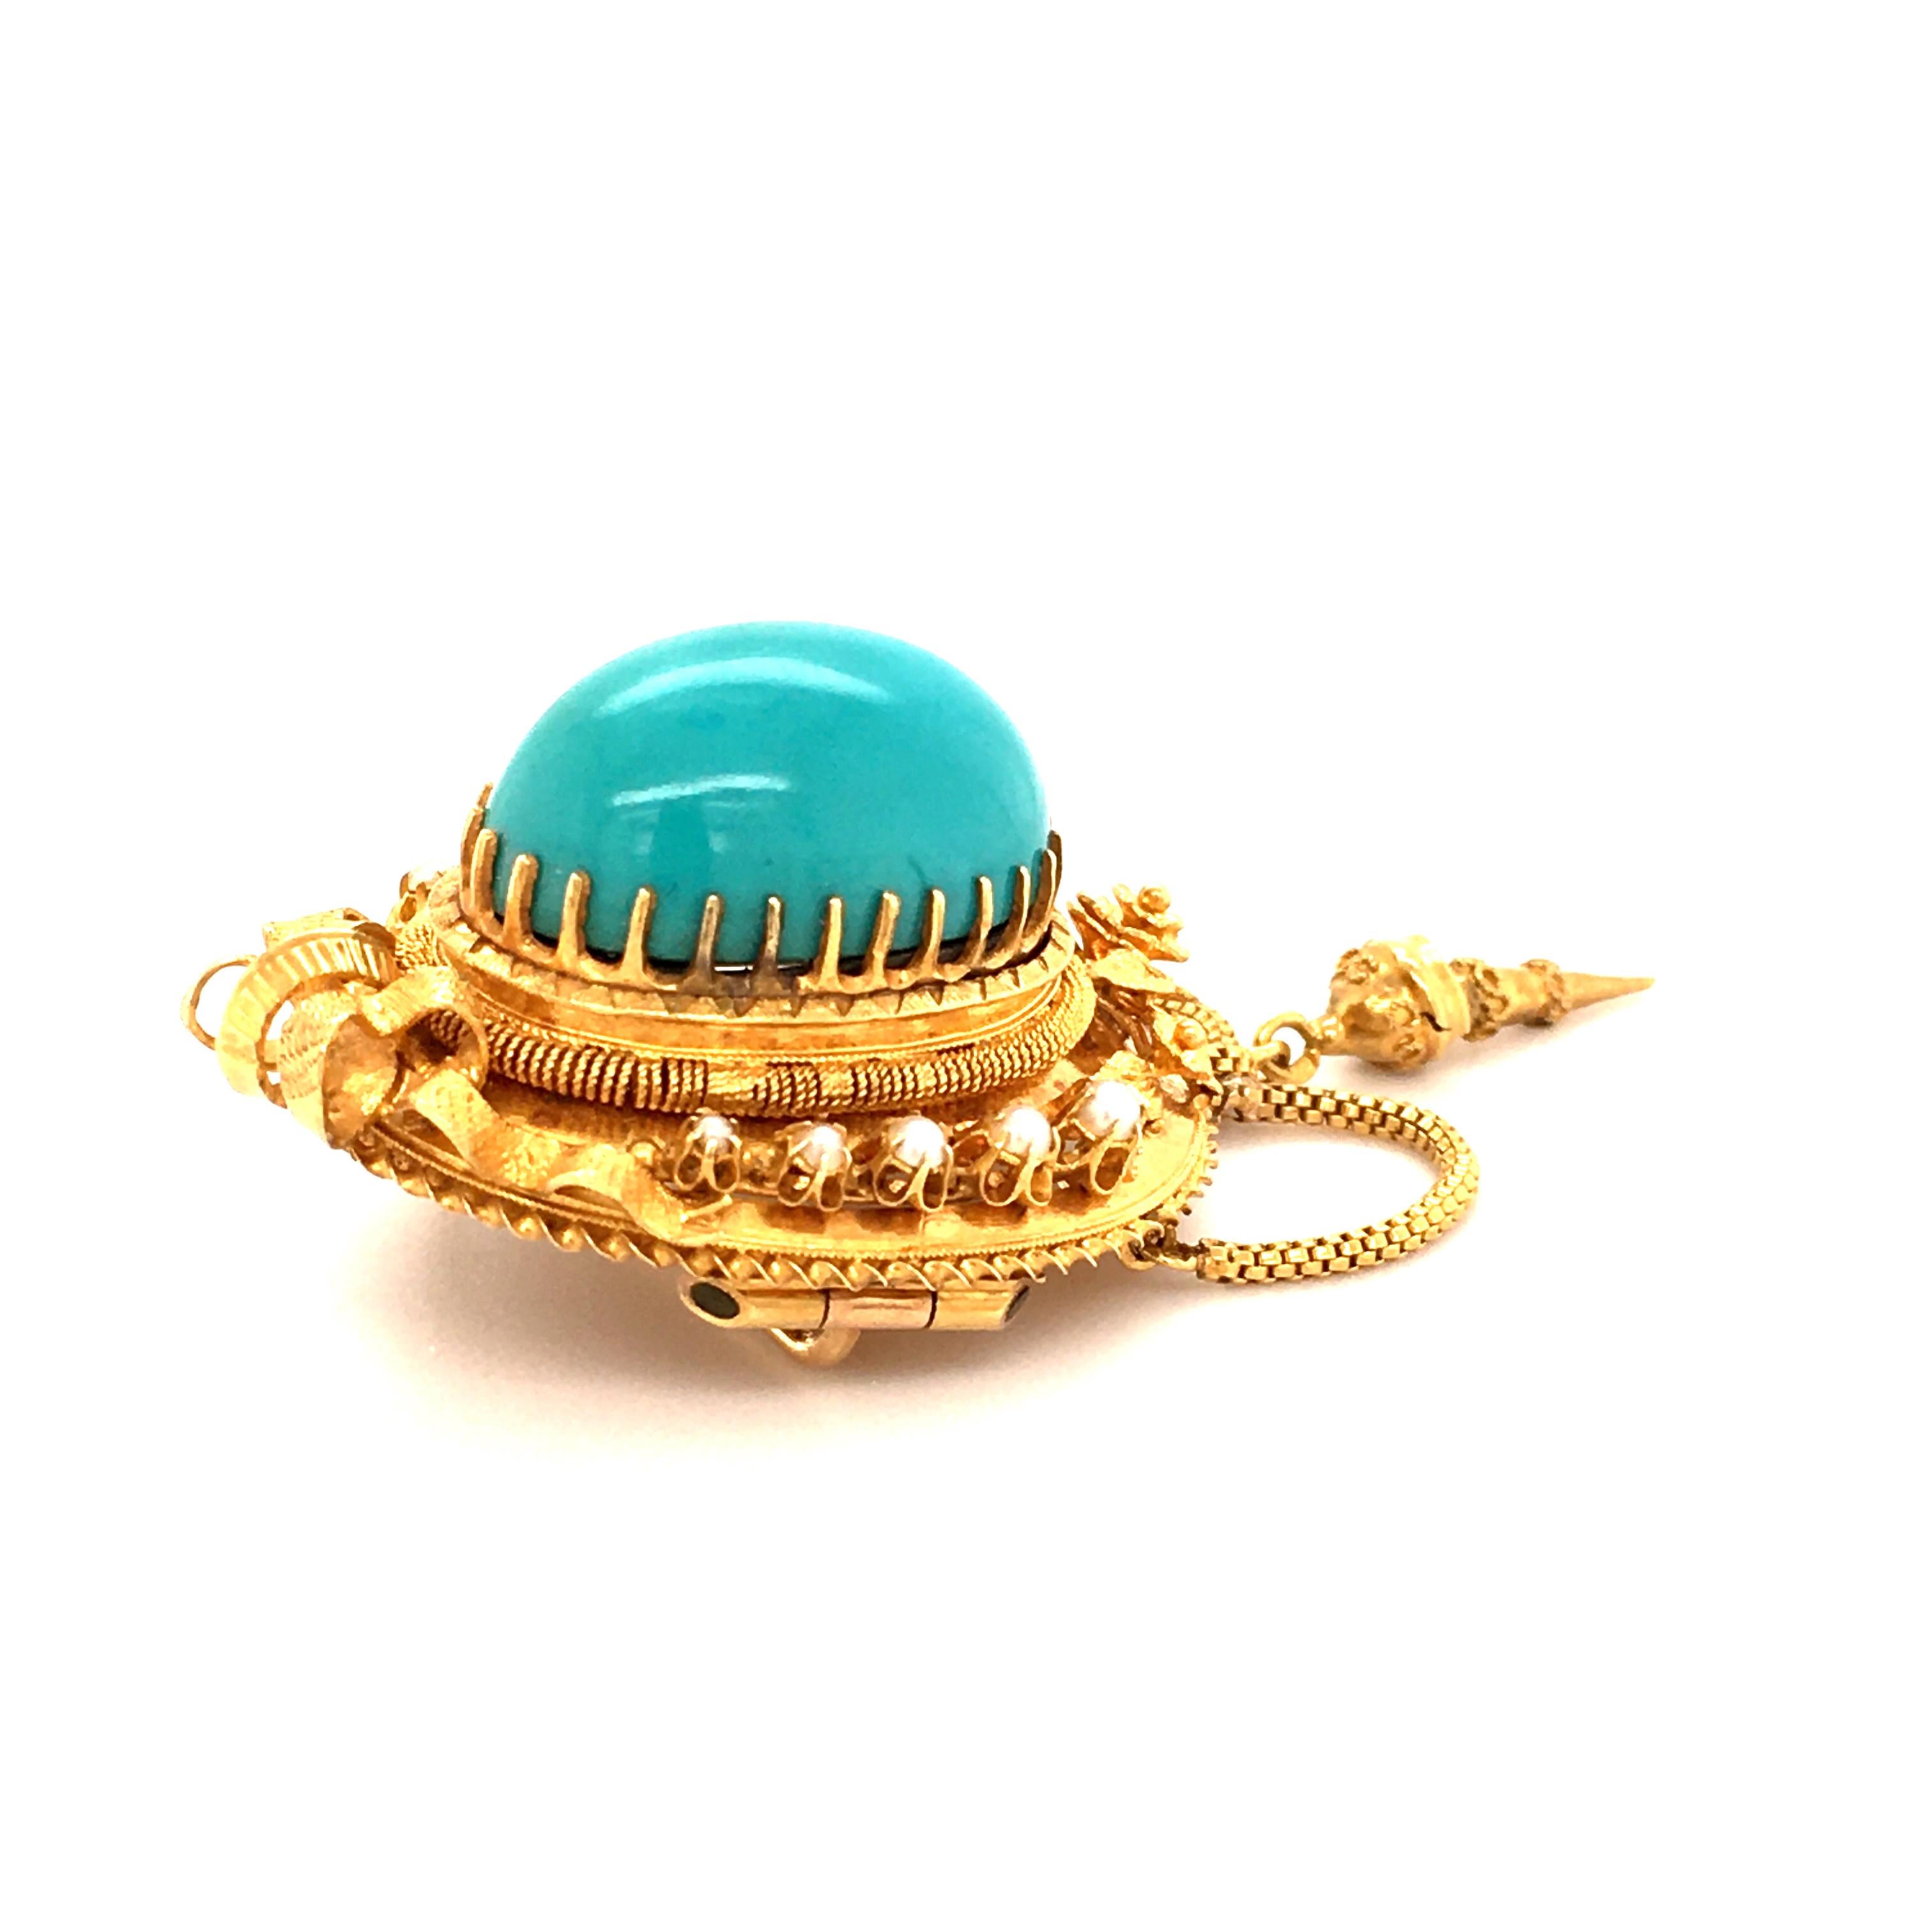 Cabochon Fabulous Victorian Turquoise and Natural Pearl Brooch